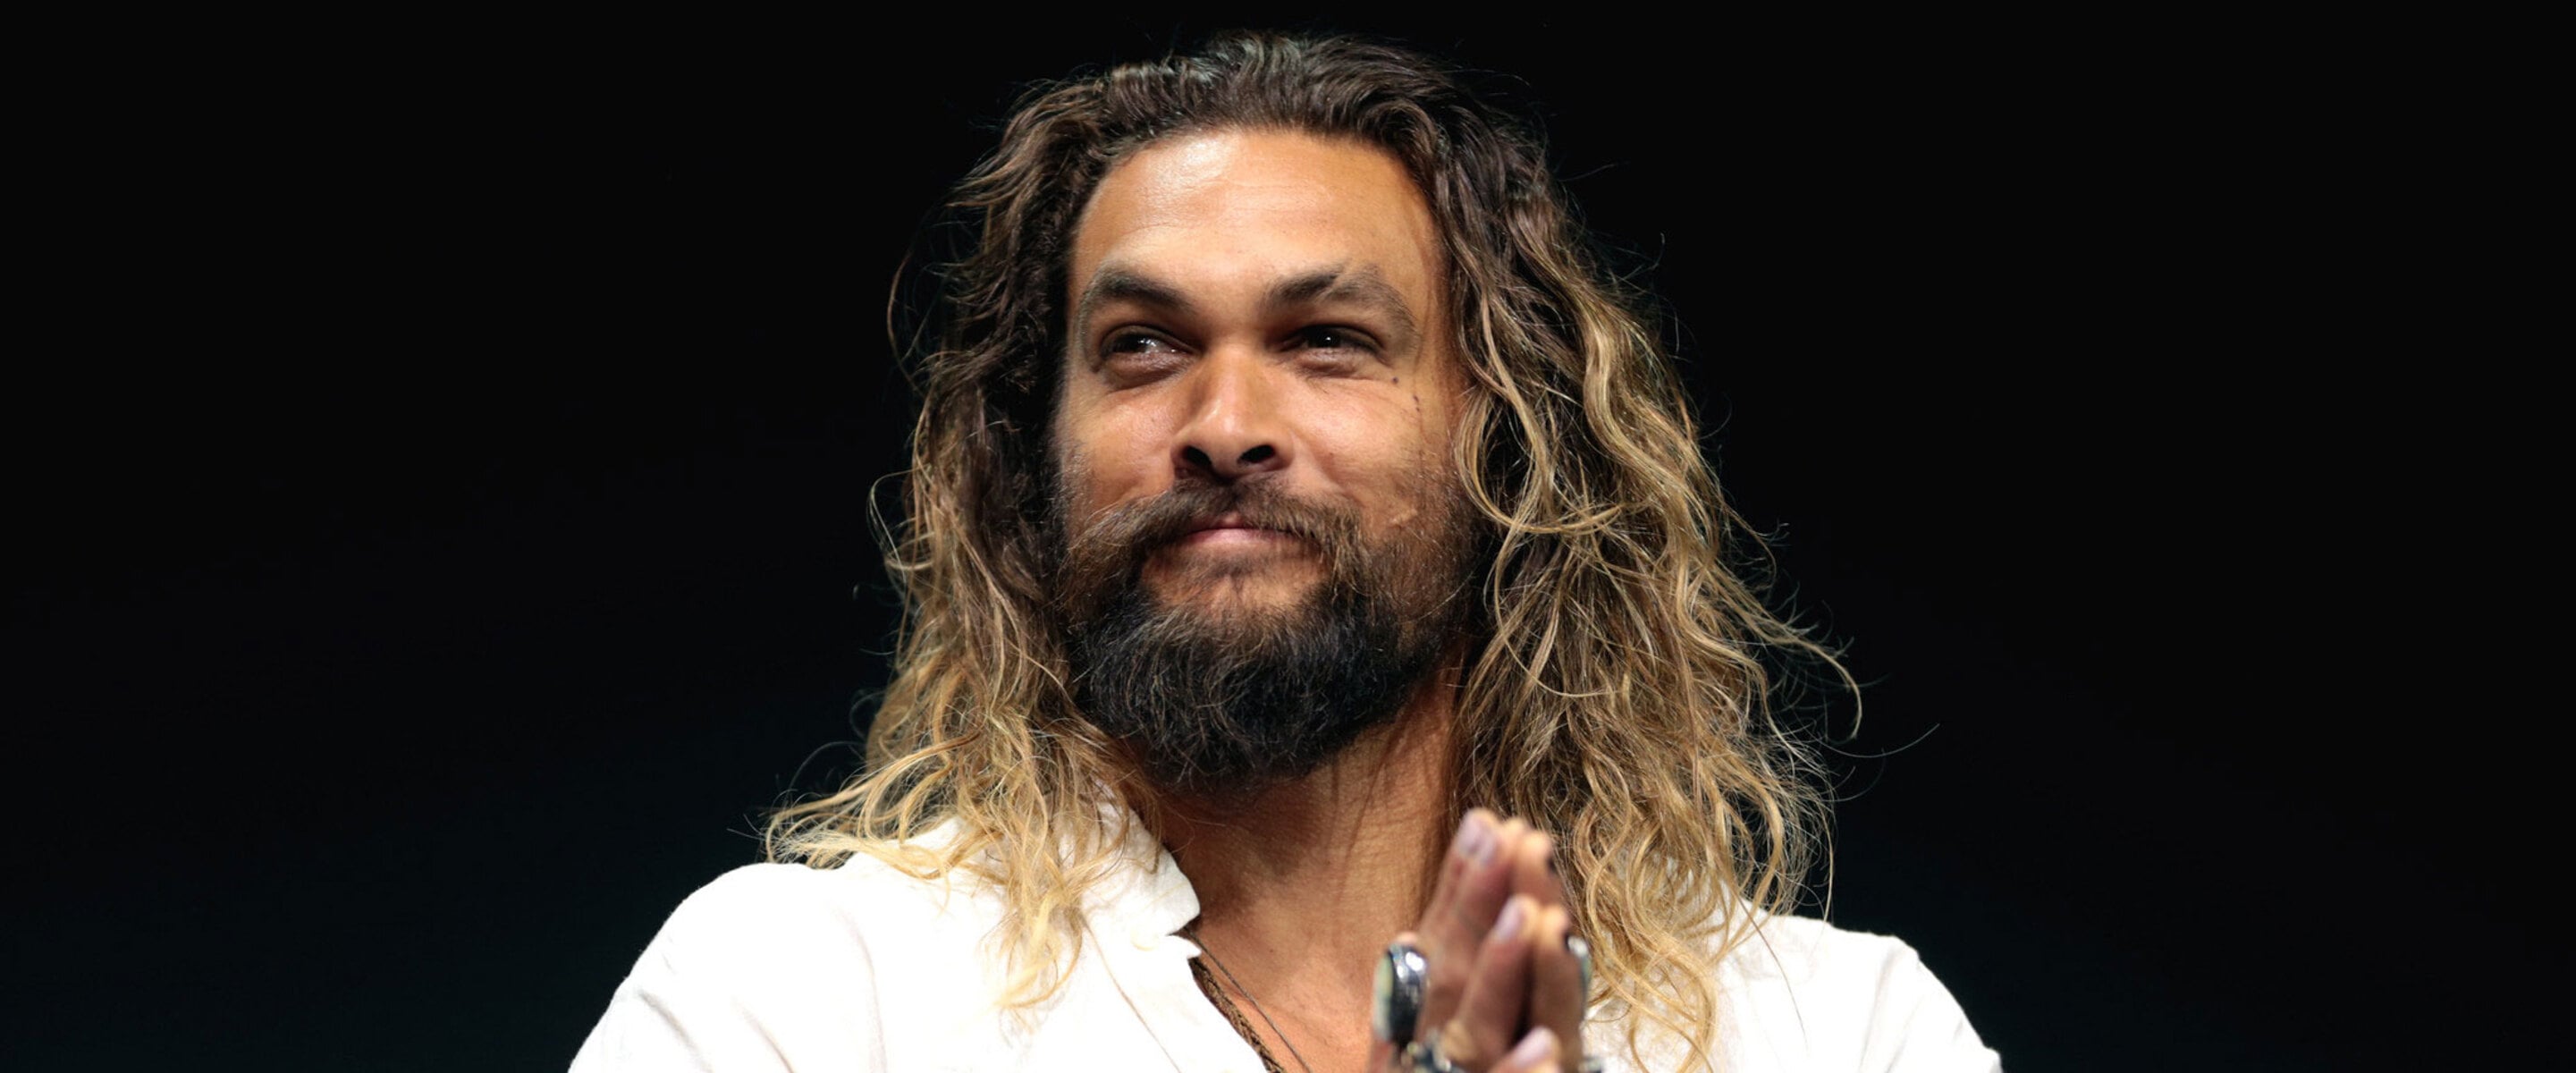 If It Isn’t Your Favorite Vegan Beer Already, Jason Momoa’s New Guinness Commercial Should Do the Trick